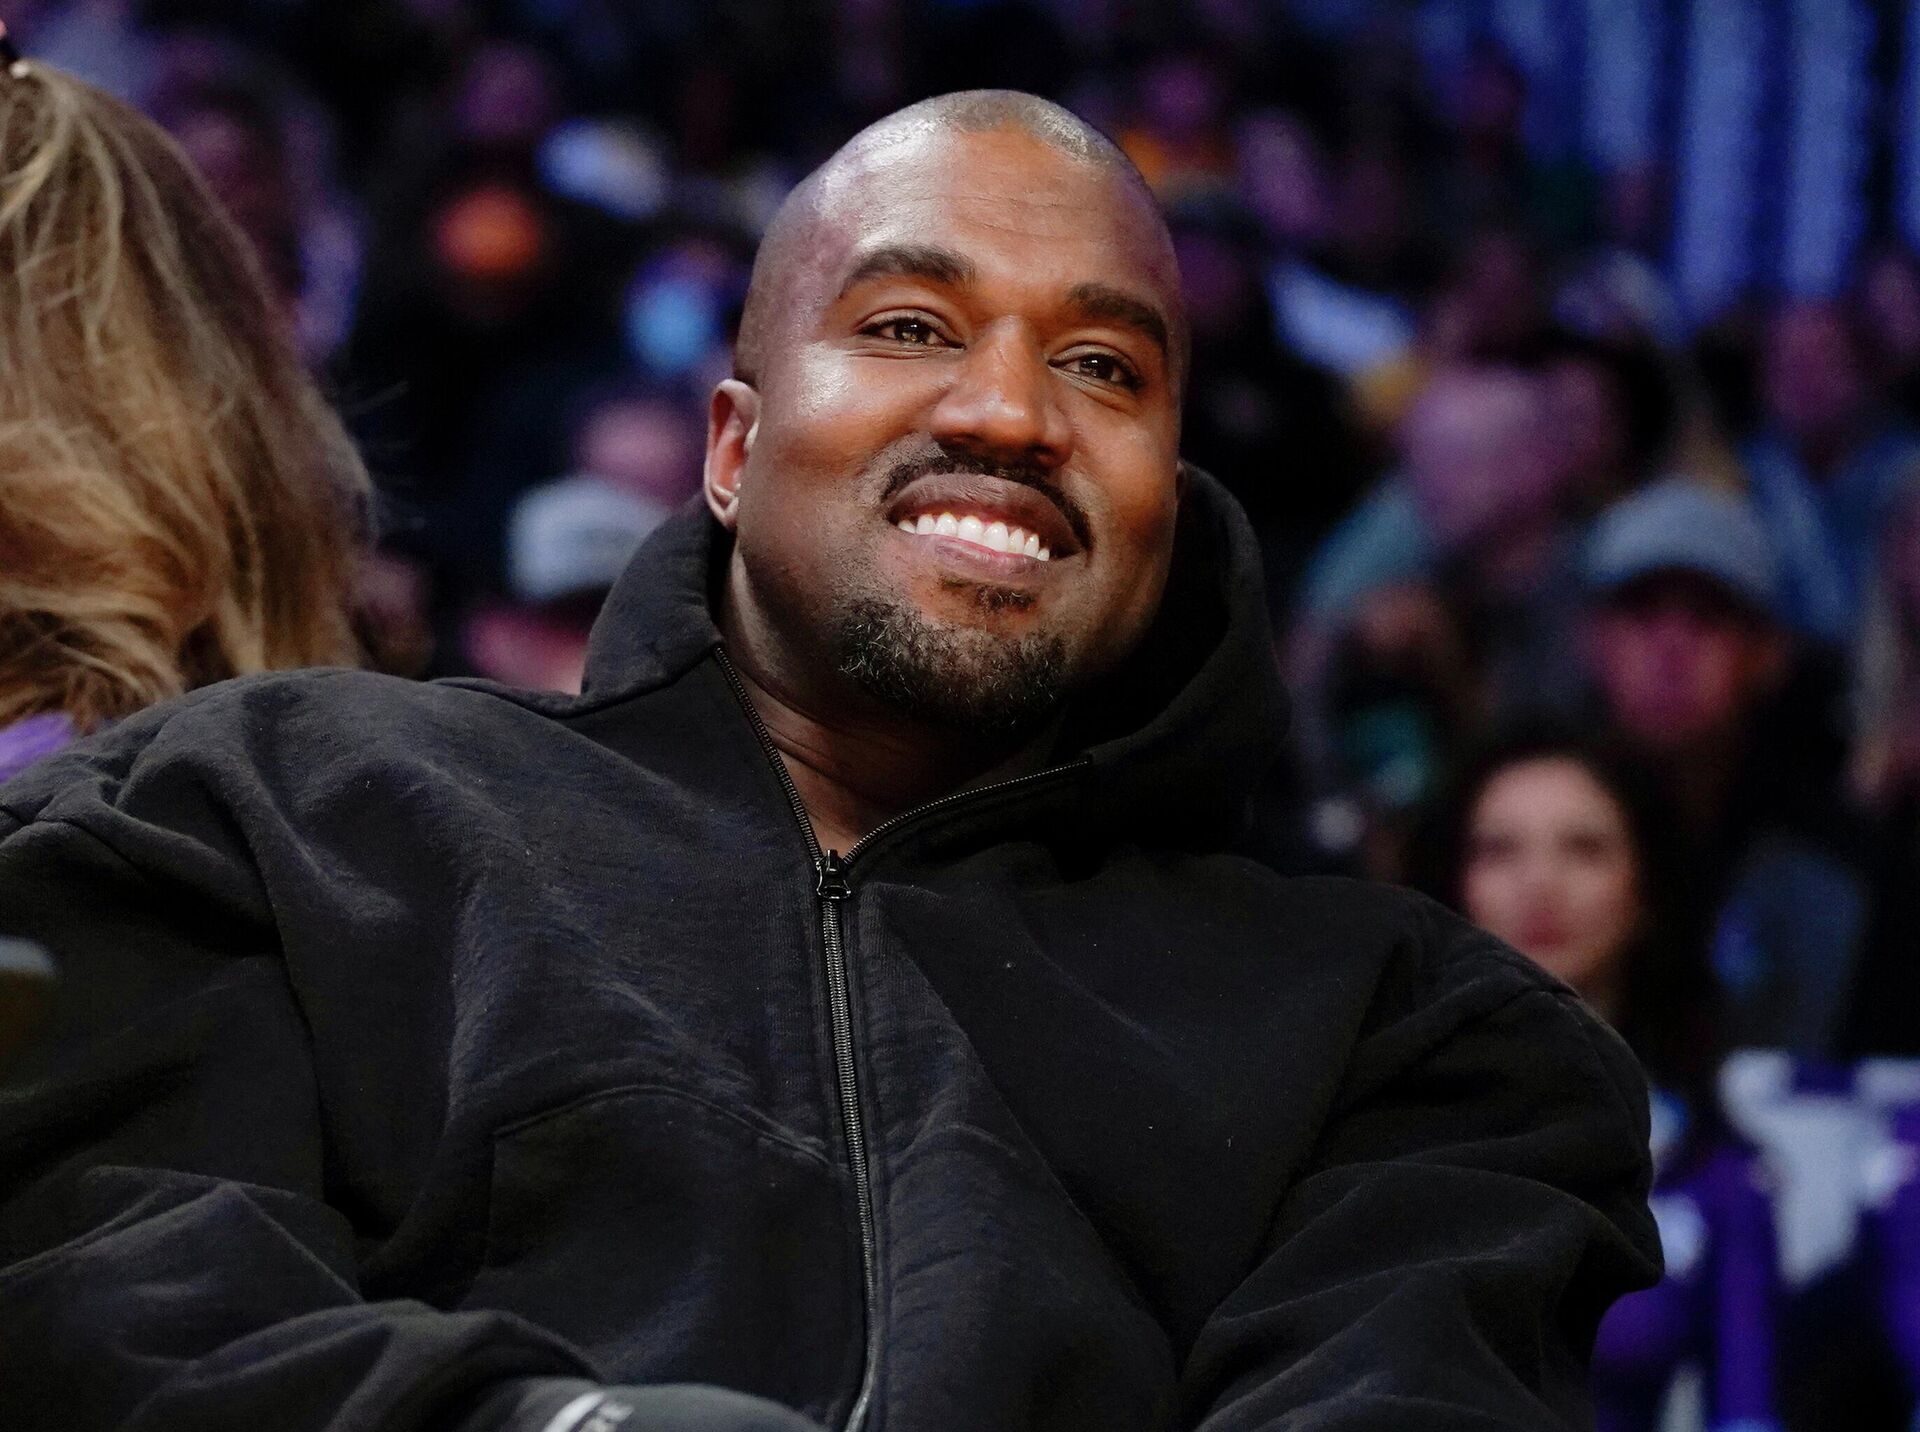 FILE - Kanye West watches the first half of an NBA basketball game between the Washington Wizards and the Los Angeles Lakers in Los Angeles, on March 11, 2022 A completed documentary about the rapper formerly known as Kanye West has been shelved amid his recent slew of antisemitic remark - Sputnik International, 1920, 23.11.2022